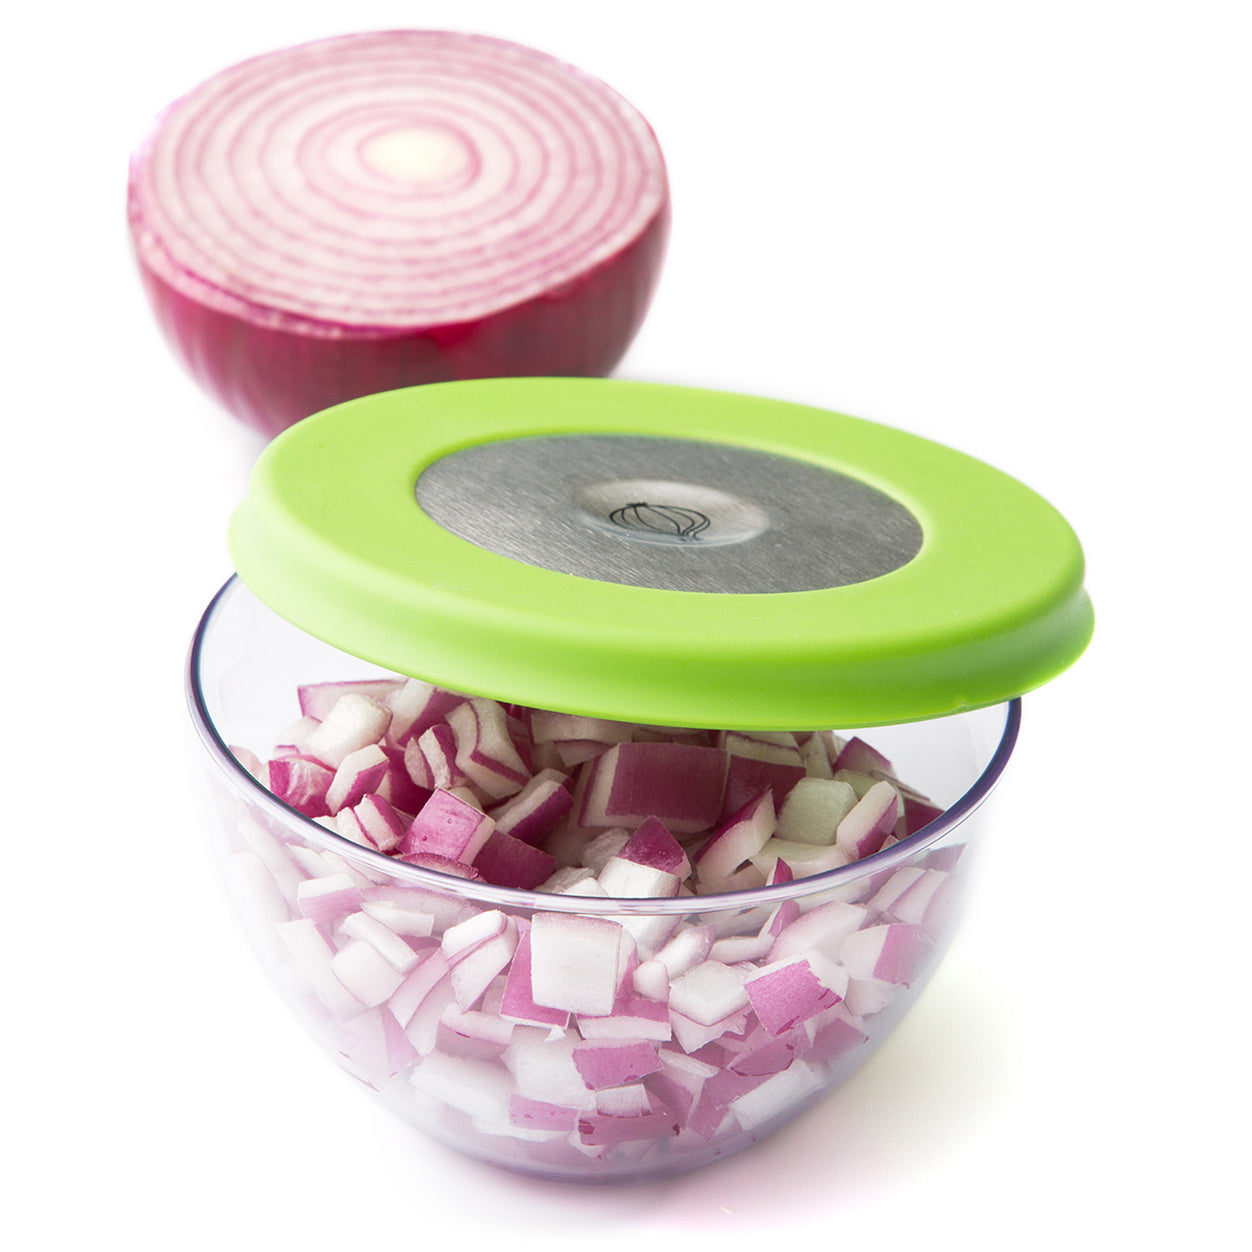 Food Storage - Container Shaped Onion